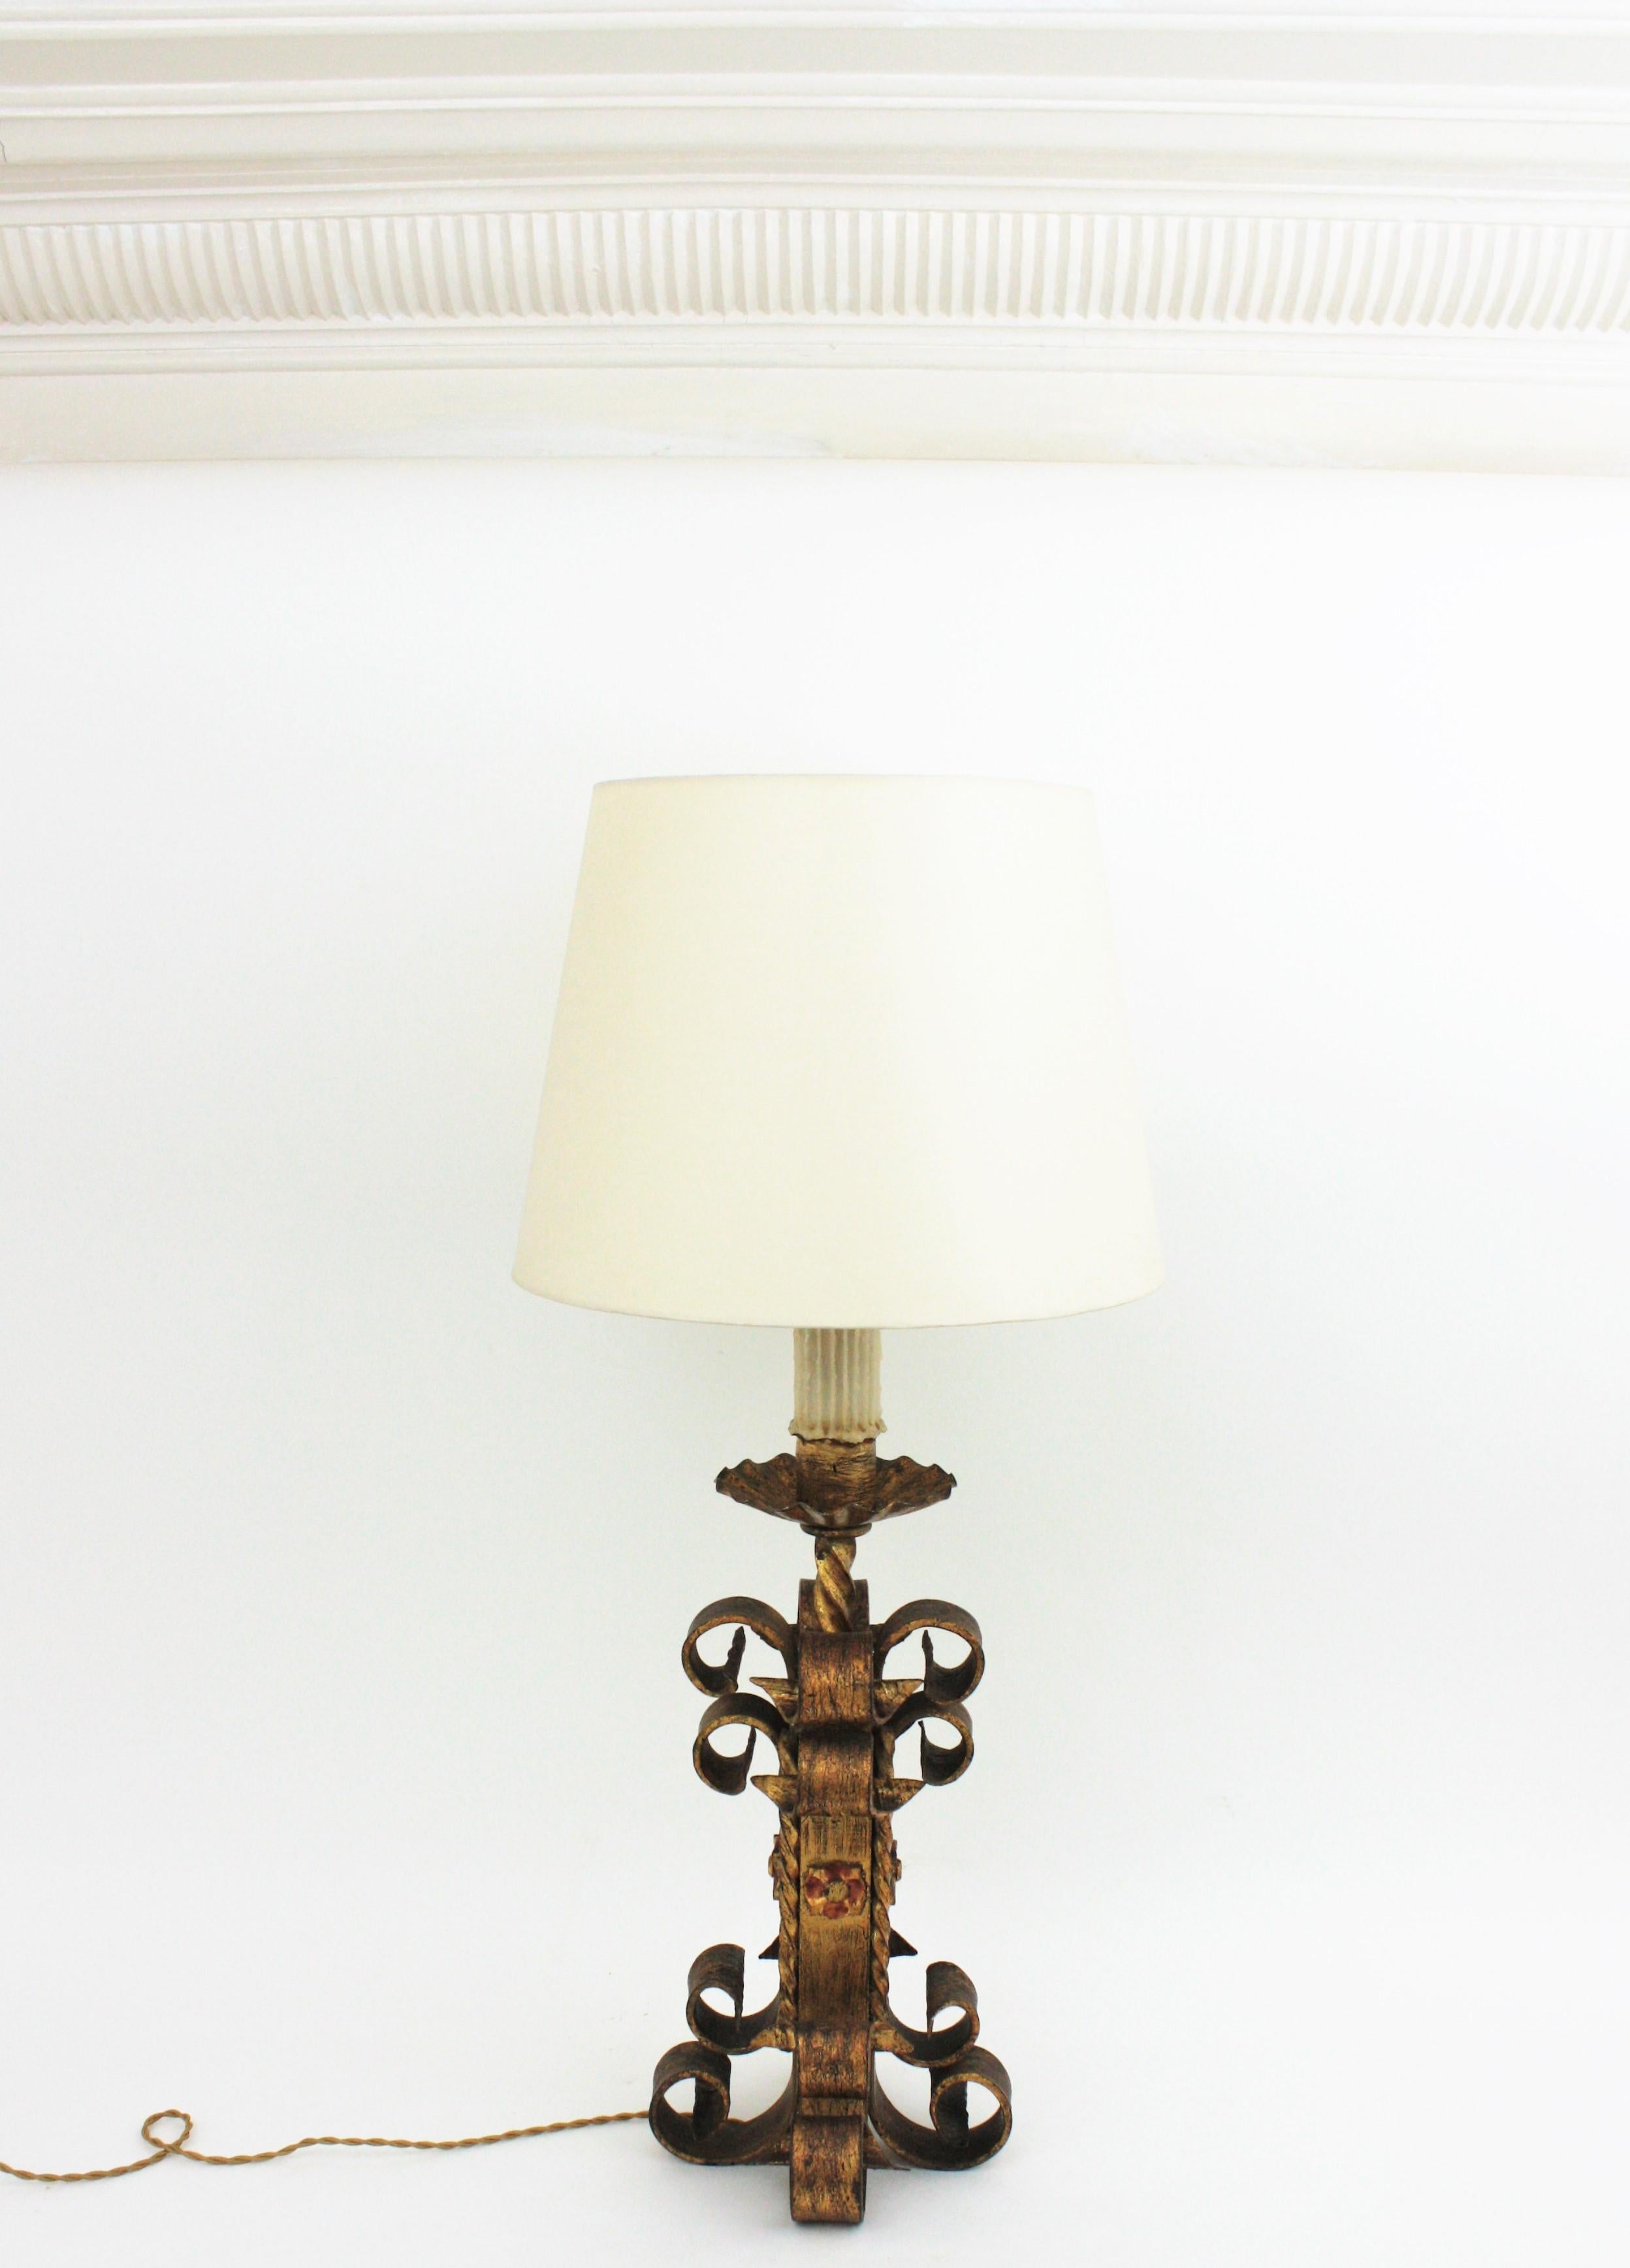 Hand-Crafted Spanish Revival Scrollwork Table Lamp in Gilt Wrought Iron, 1940s For Sale